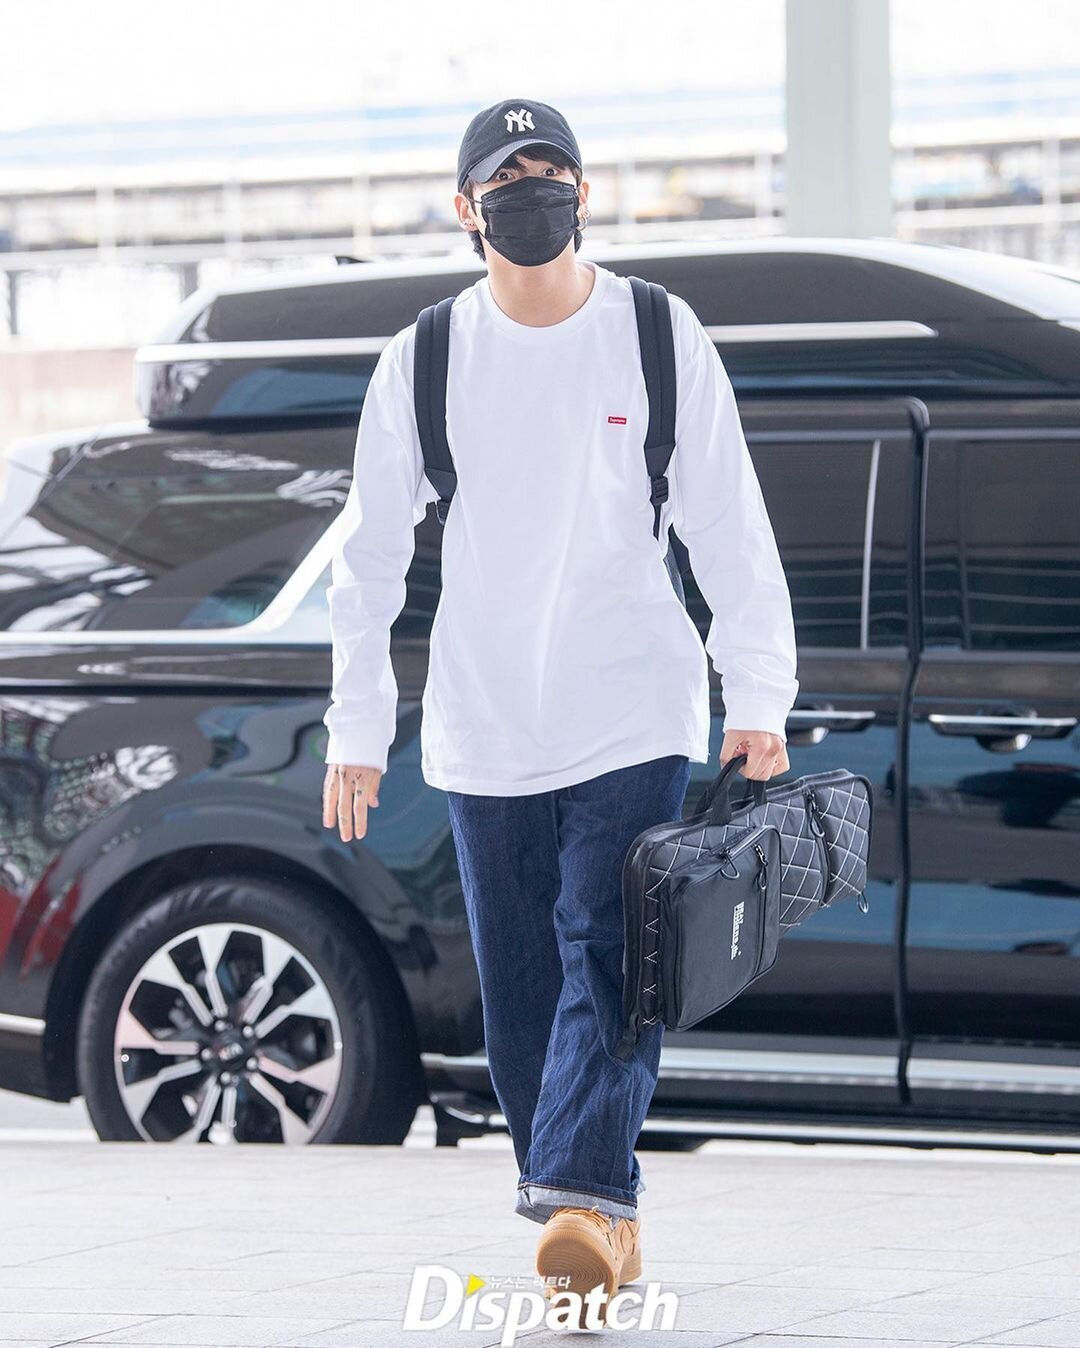 May 28, 2022 Jungkook at Incheon International Airport Departing for the  United States